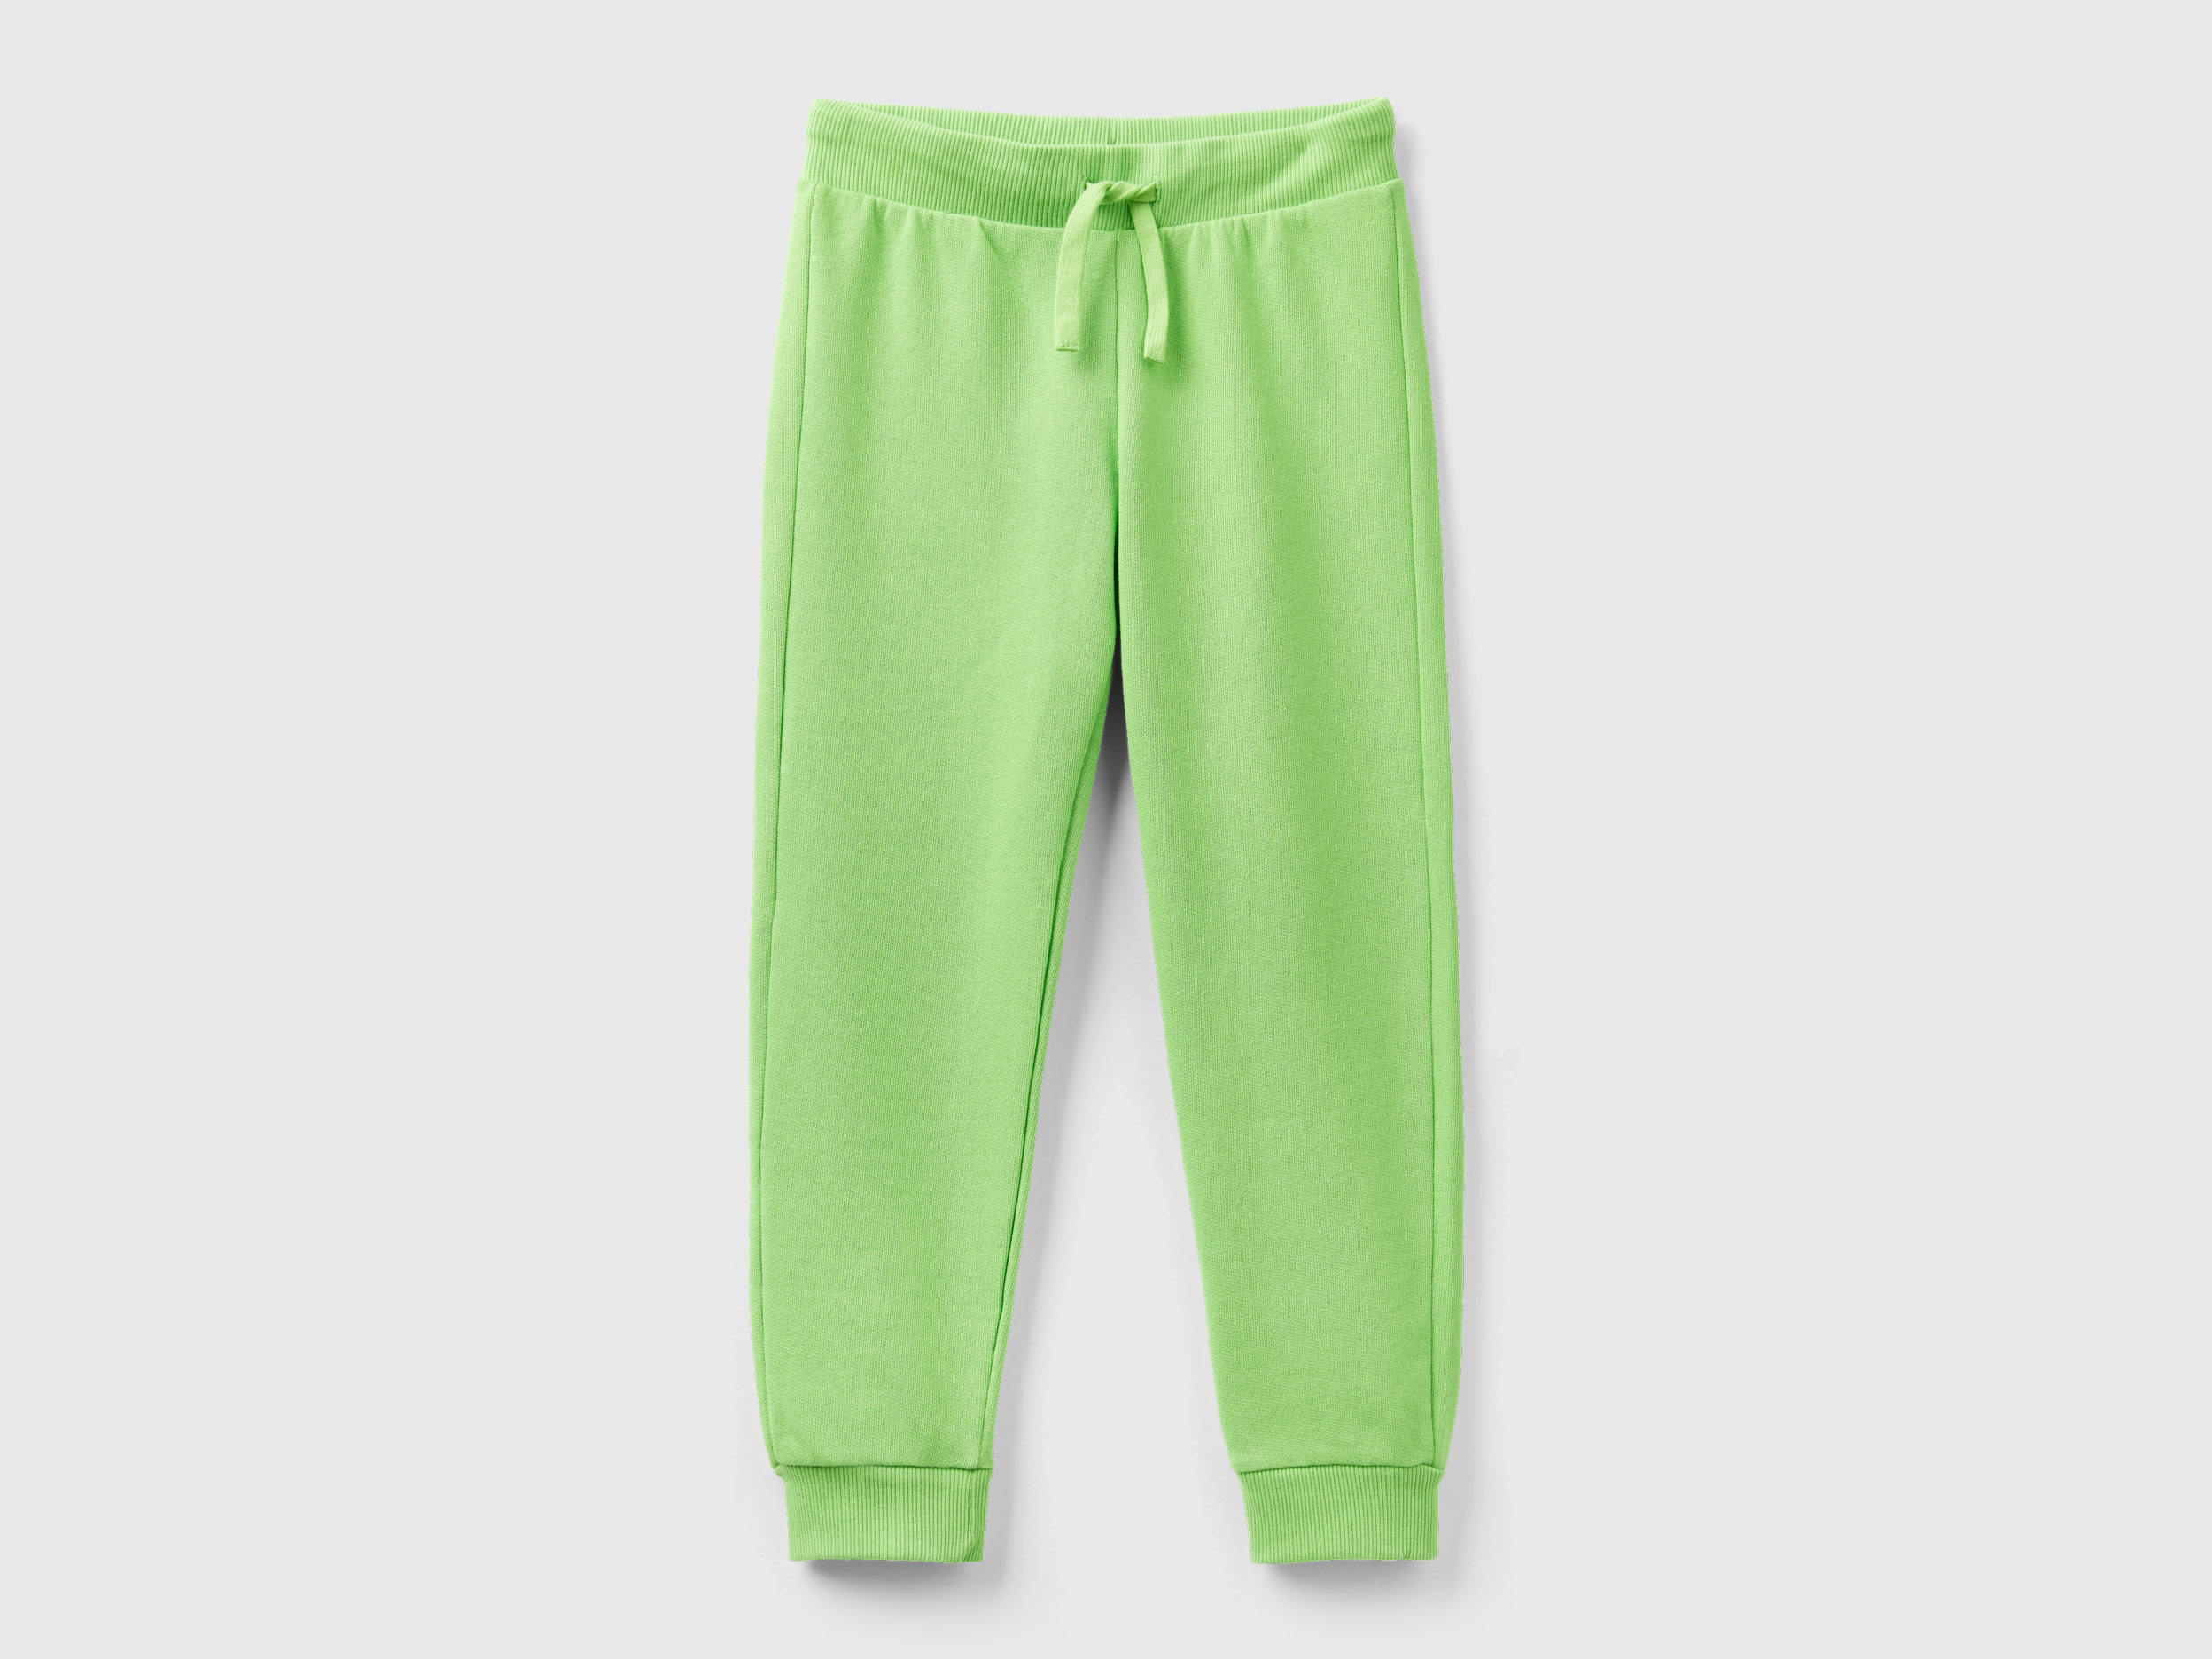 Benetton, Sporty Trousers With Drawstring, size 3XL, Light Green, Kids